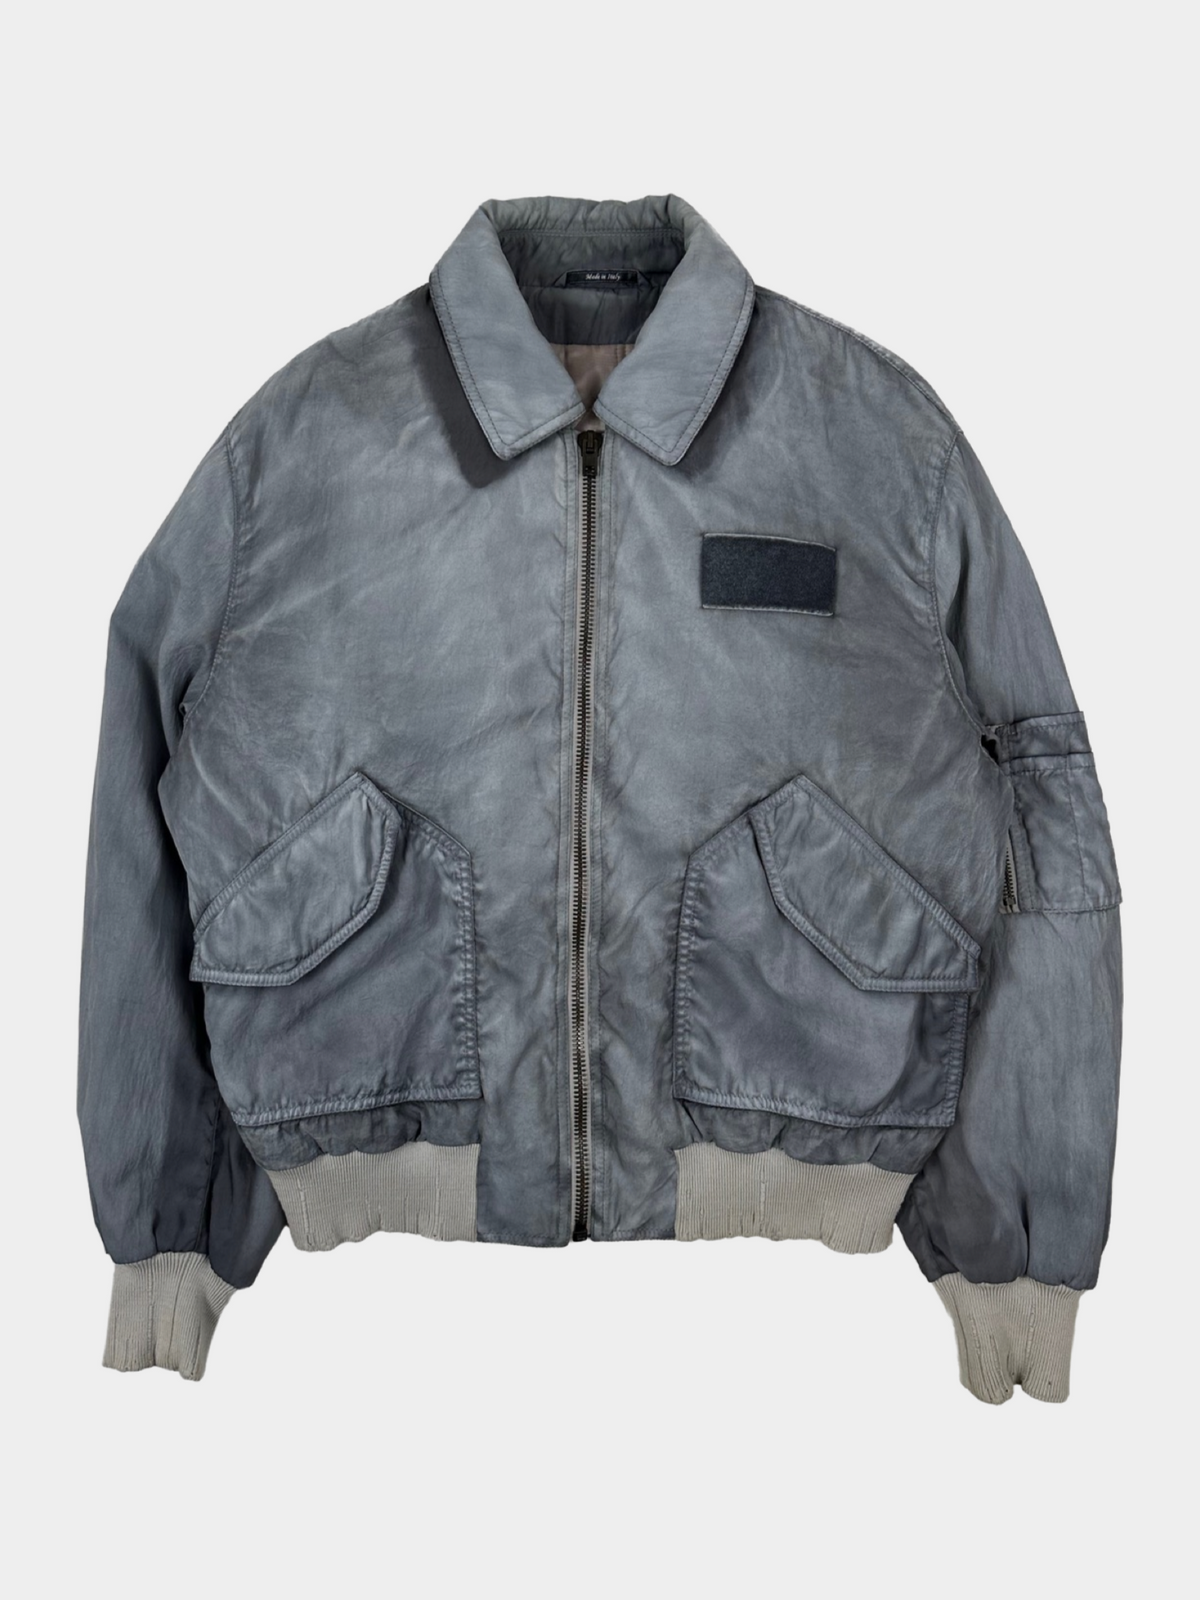 MARTIN MARGIELA Distressed Grey Washed Military Bomber — ARCHIVED